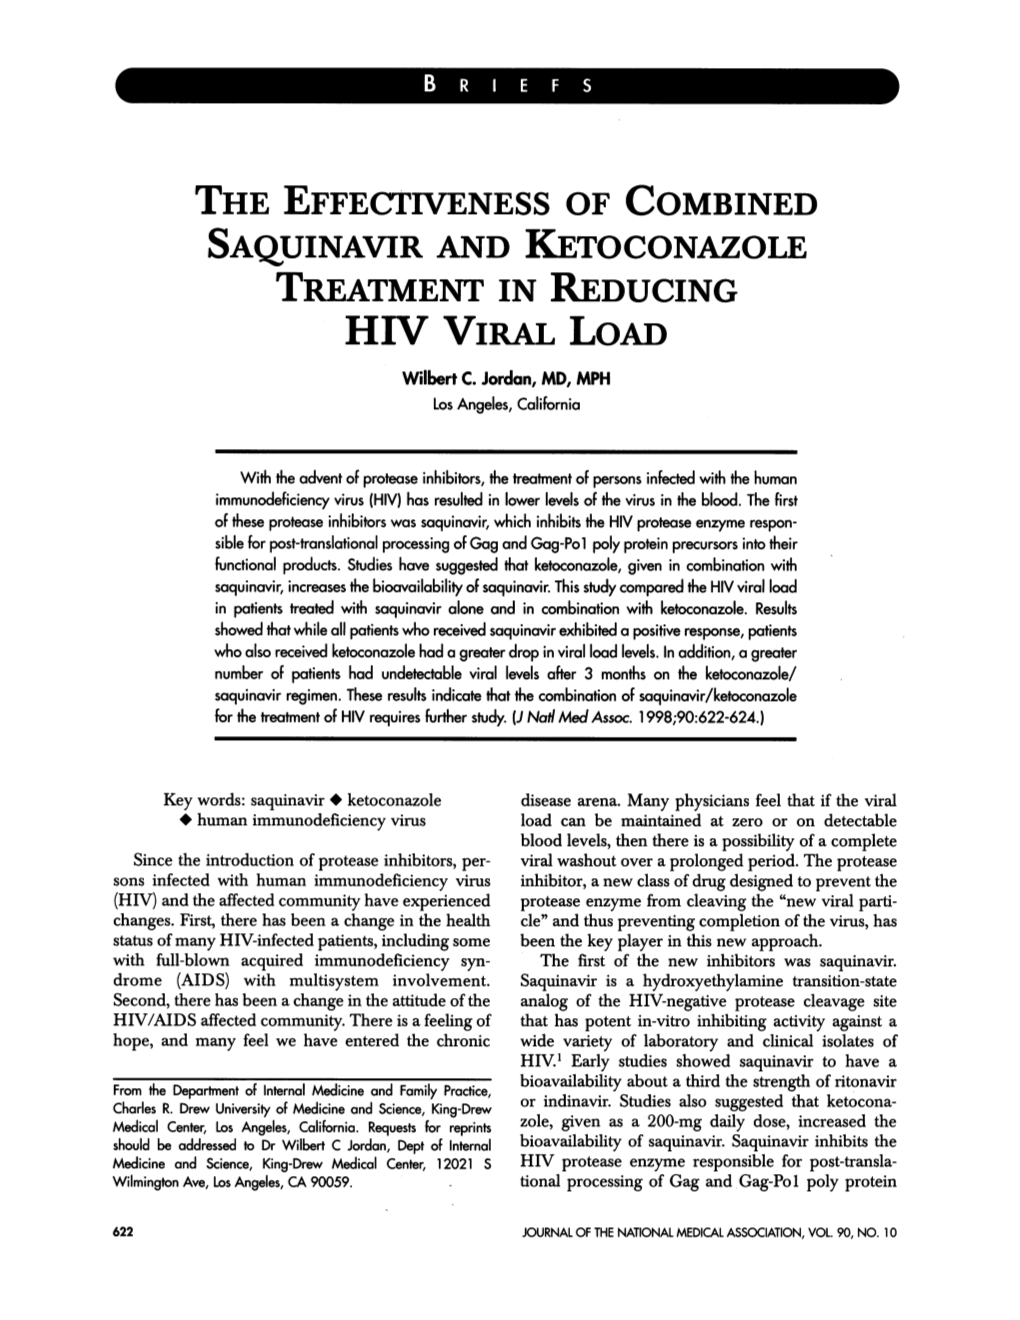 THE EFFECTIVENESS of COMBINED SAQUINAVIR and KETOCONAZOLE TREATMENT in REDUCING HIV VIRAL Load Wilbert C